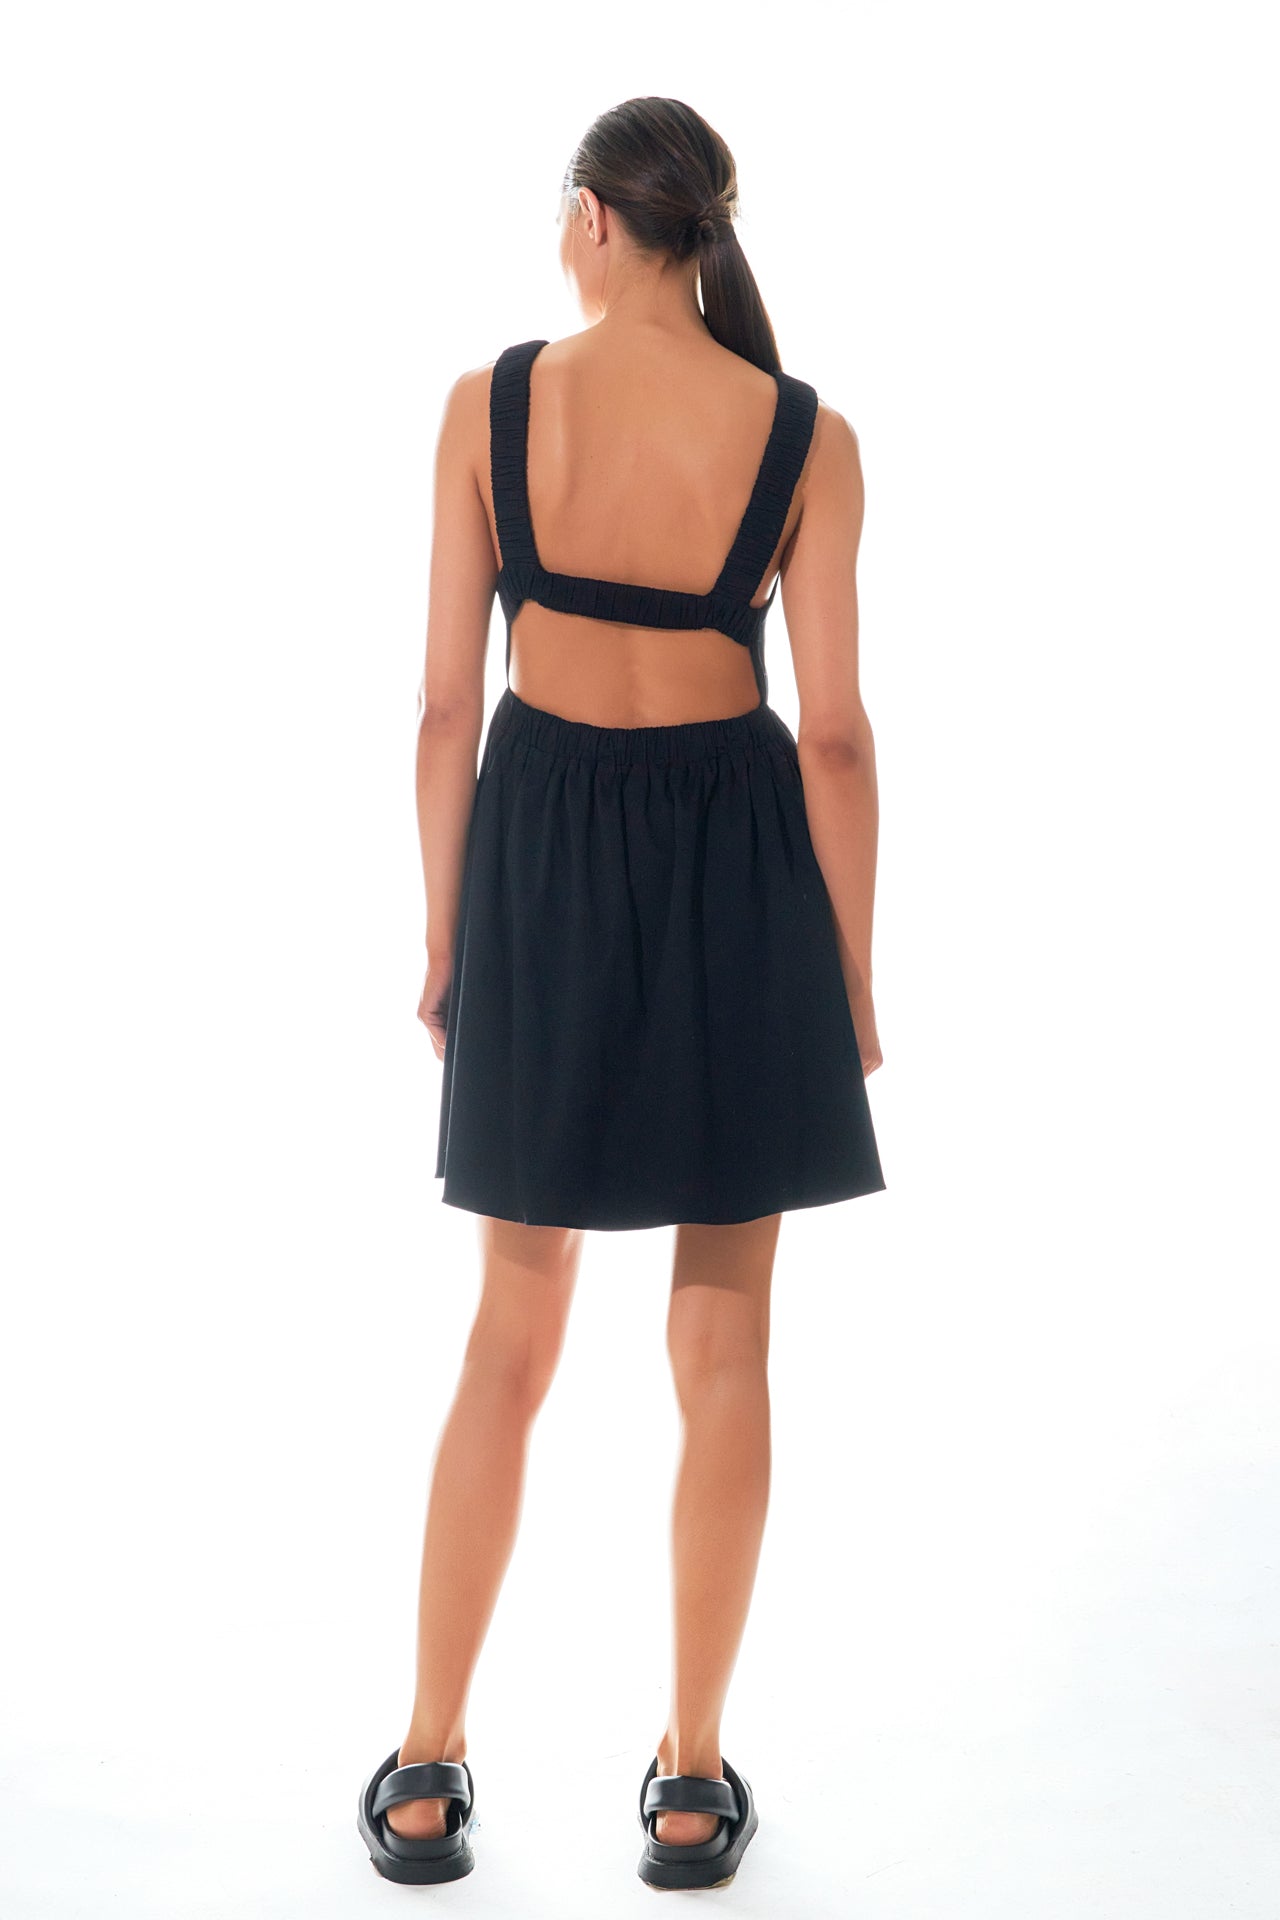 GREY LAB - Open Elastic Back Mini - DRESSES available at Objectrare